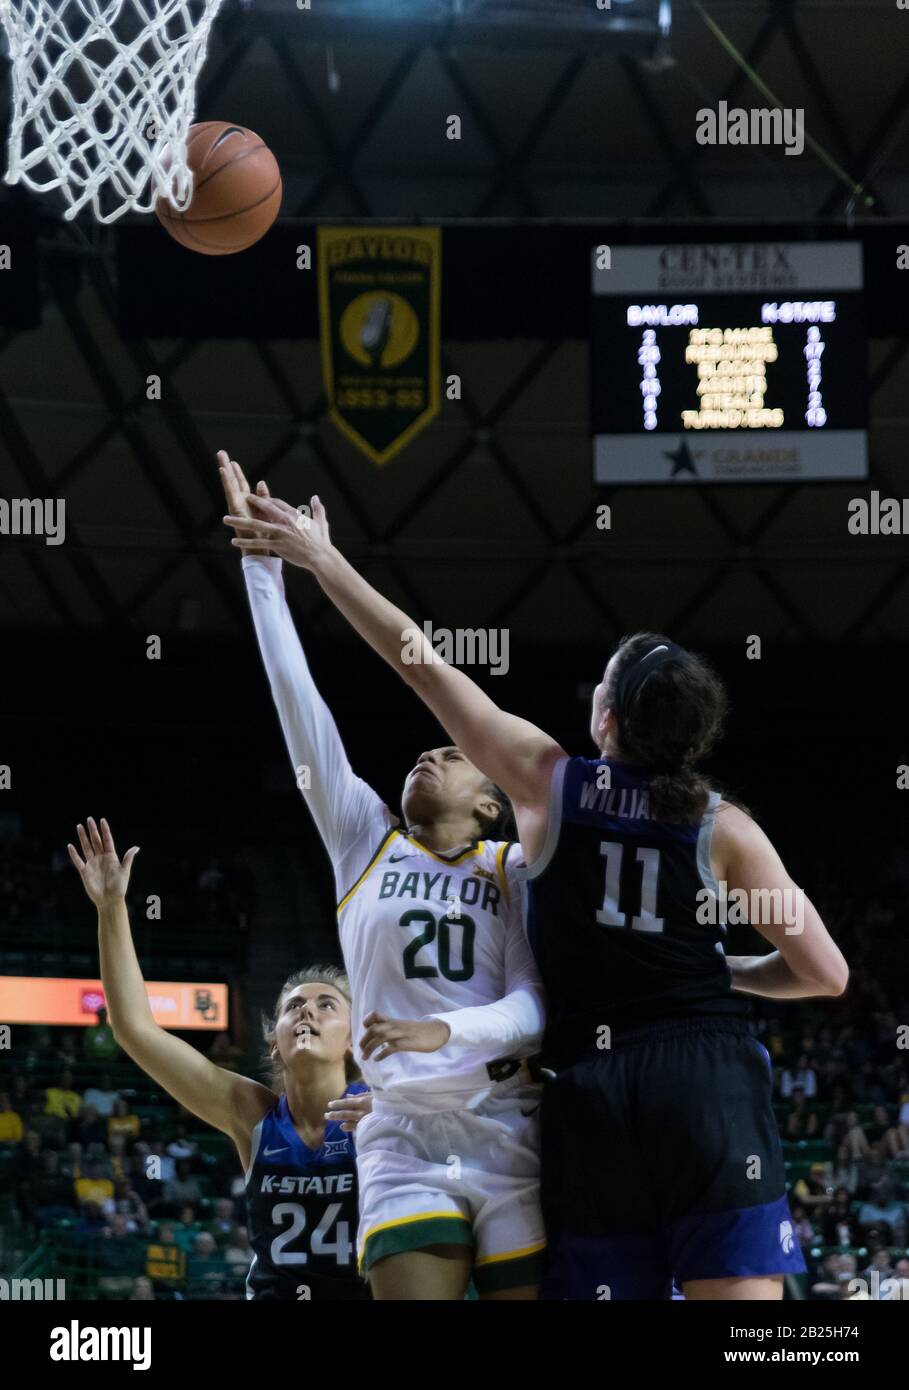 Waco, Texas, USA. 29th Feb, 2020. Kansas State Wildcats forward Peyton Williams (11) fouls Baylor Lady Bears guard Juicy Landrum (20) during the 2nd half of the NCAA Women's Basketball game between Kansas State and the Baylor Lady Bears at The Ferrell Center in Waco, Texas. Matthew Lynch/CSM/Alamy Live News Stock Photo